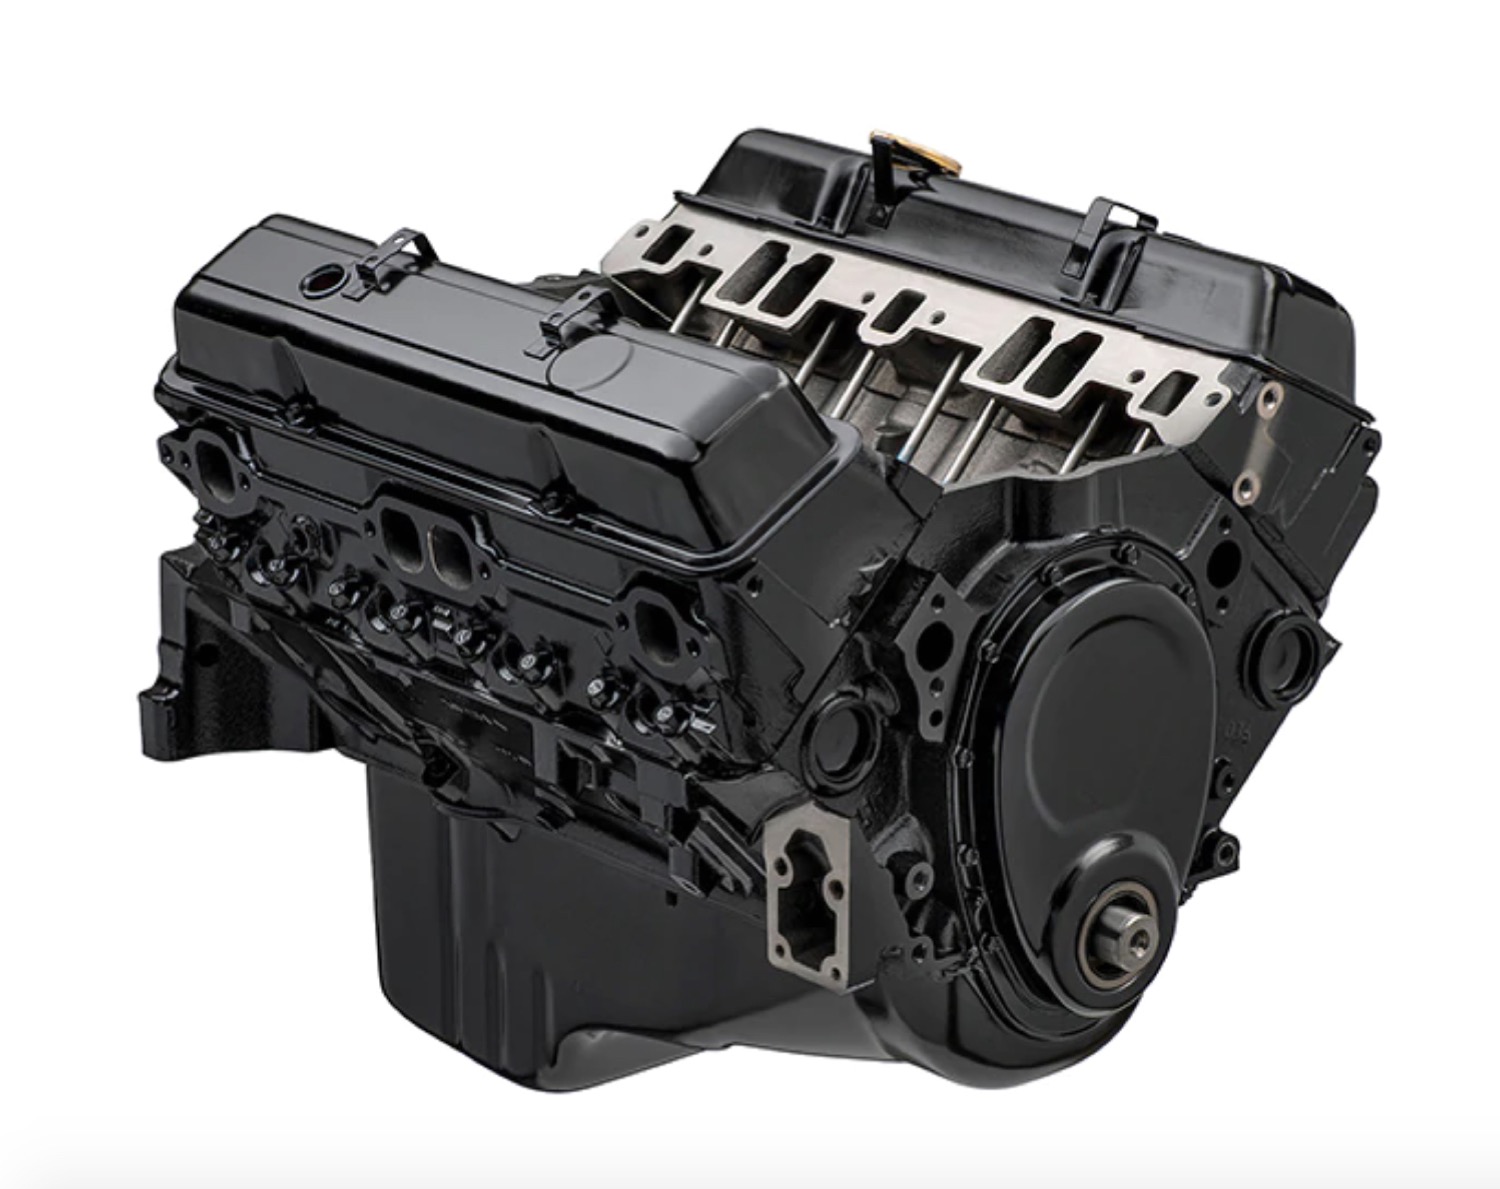 Chevrolet Performance Offers New 350 265 Chevy Small Block Gm Authority